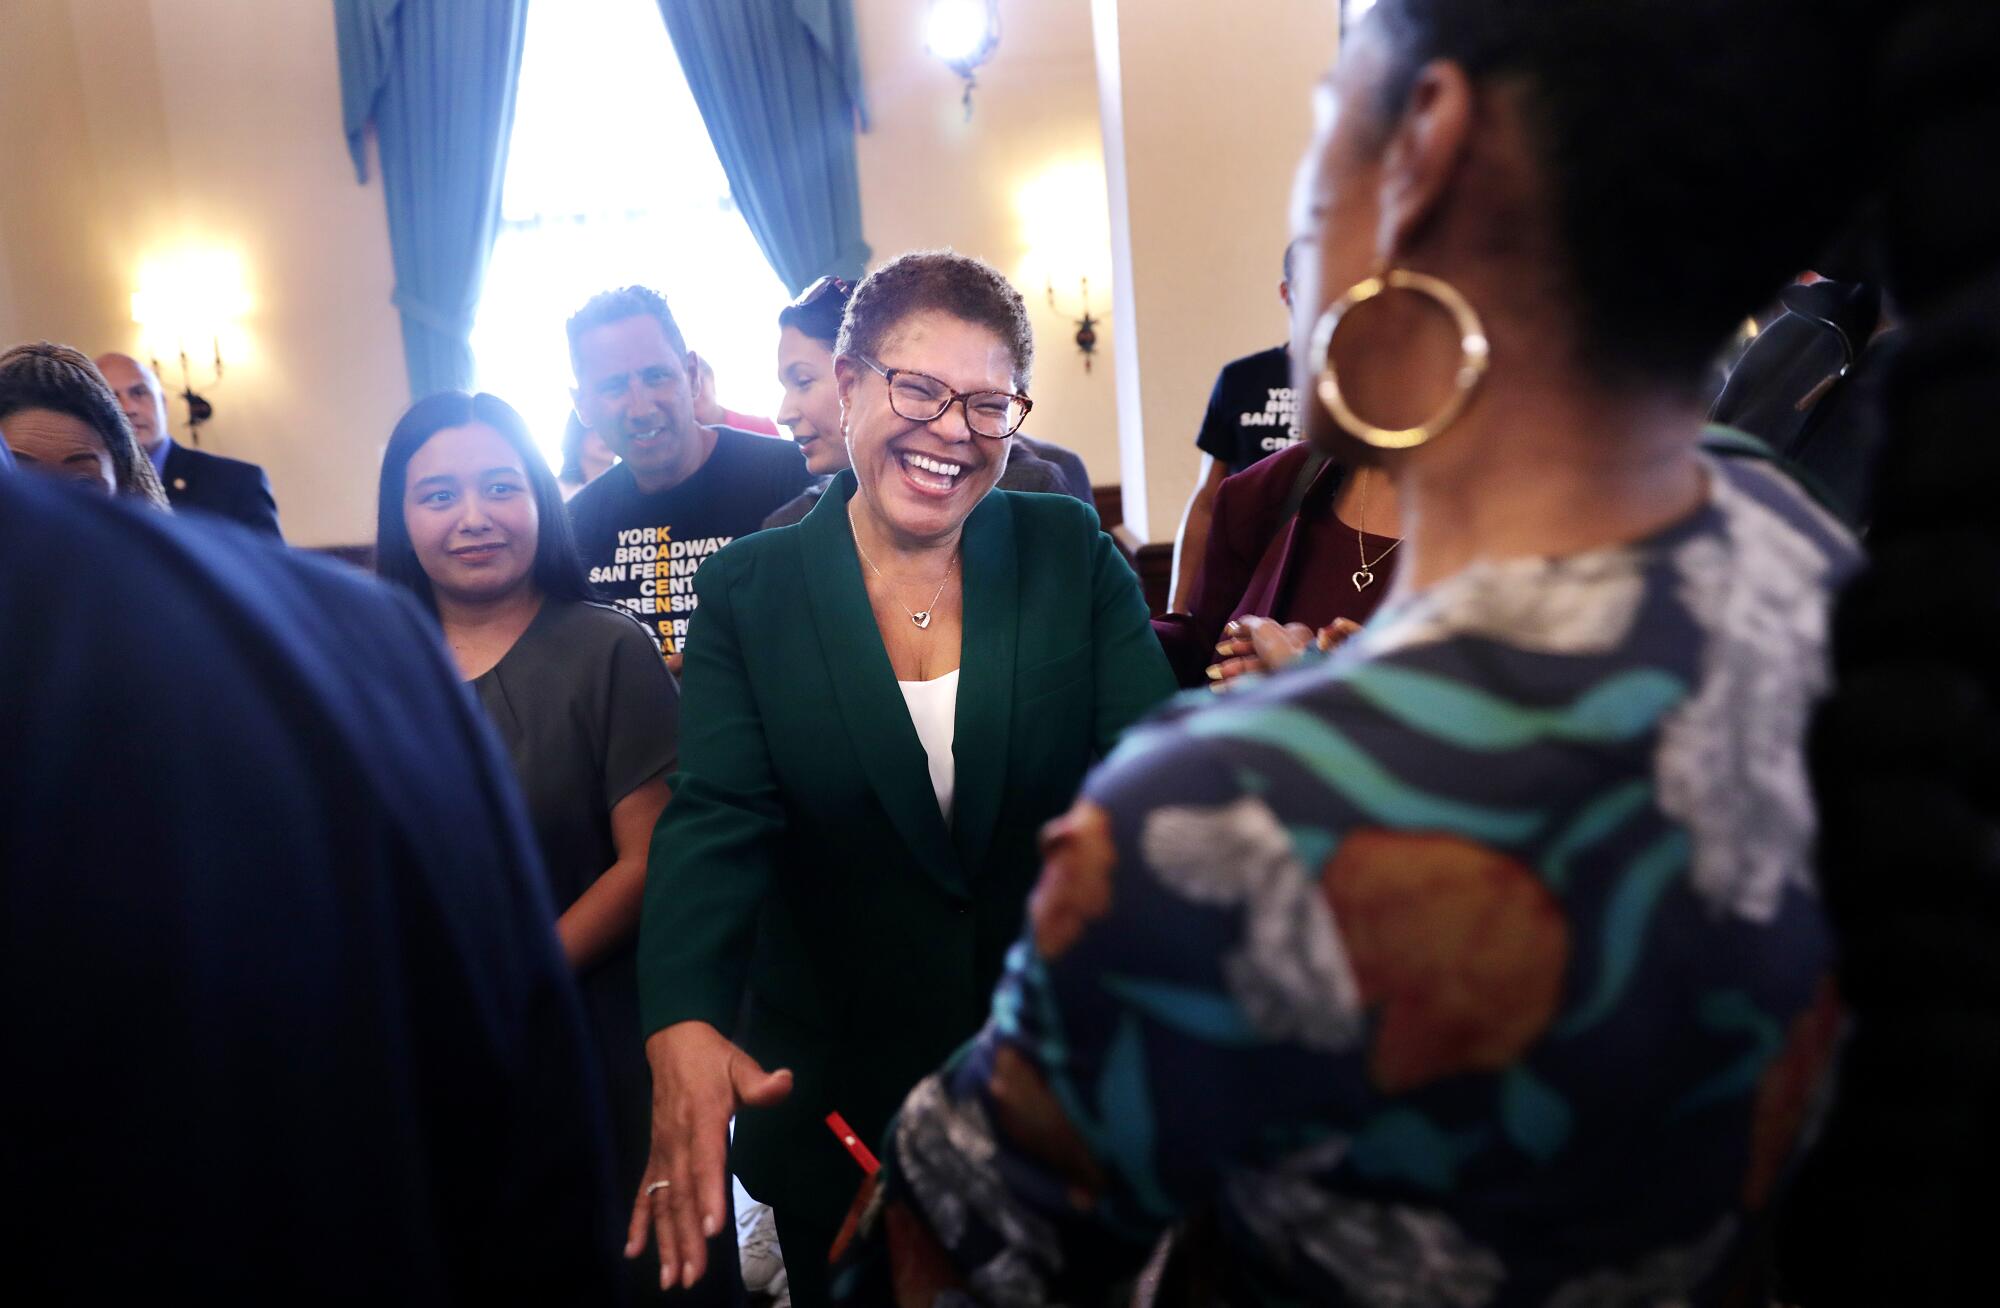 L.A. Mayor-elect Karen Bass greets supporters after her election announcement at the Wilshire Ebell Theatre.